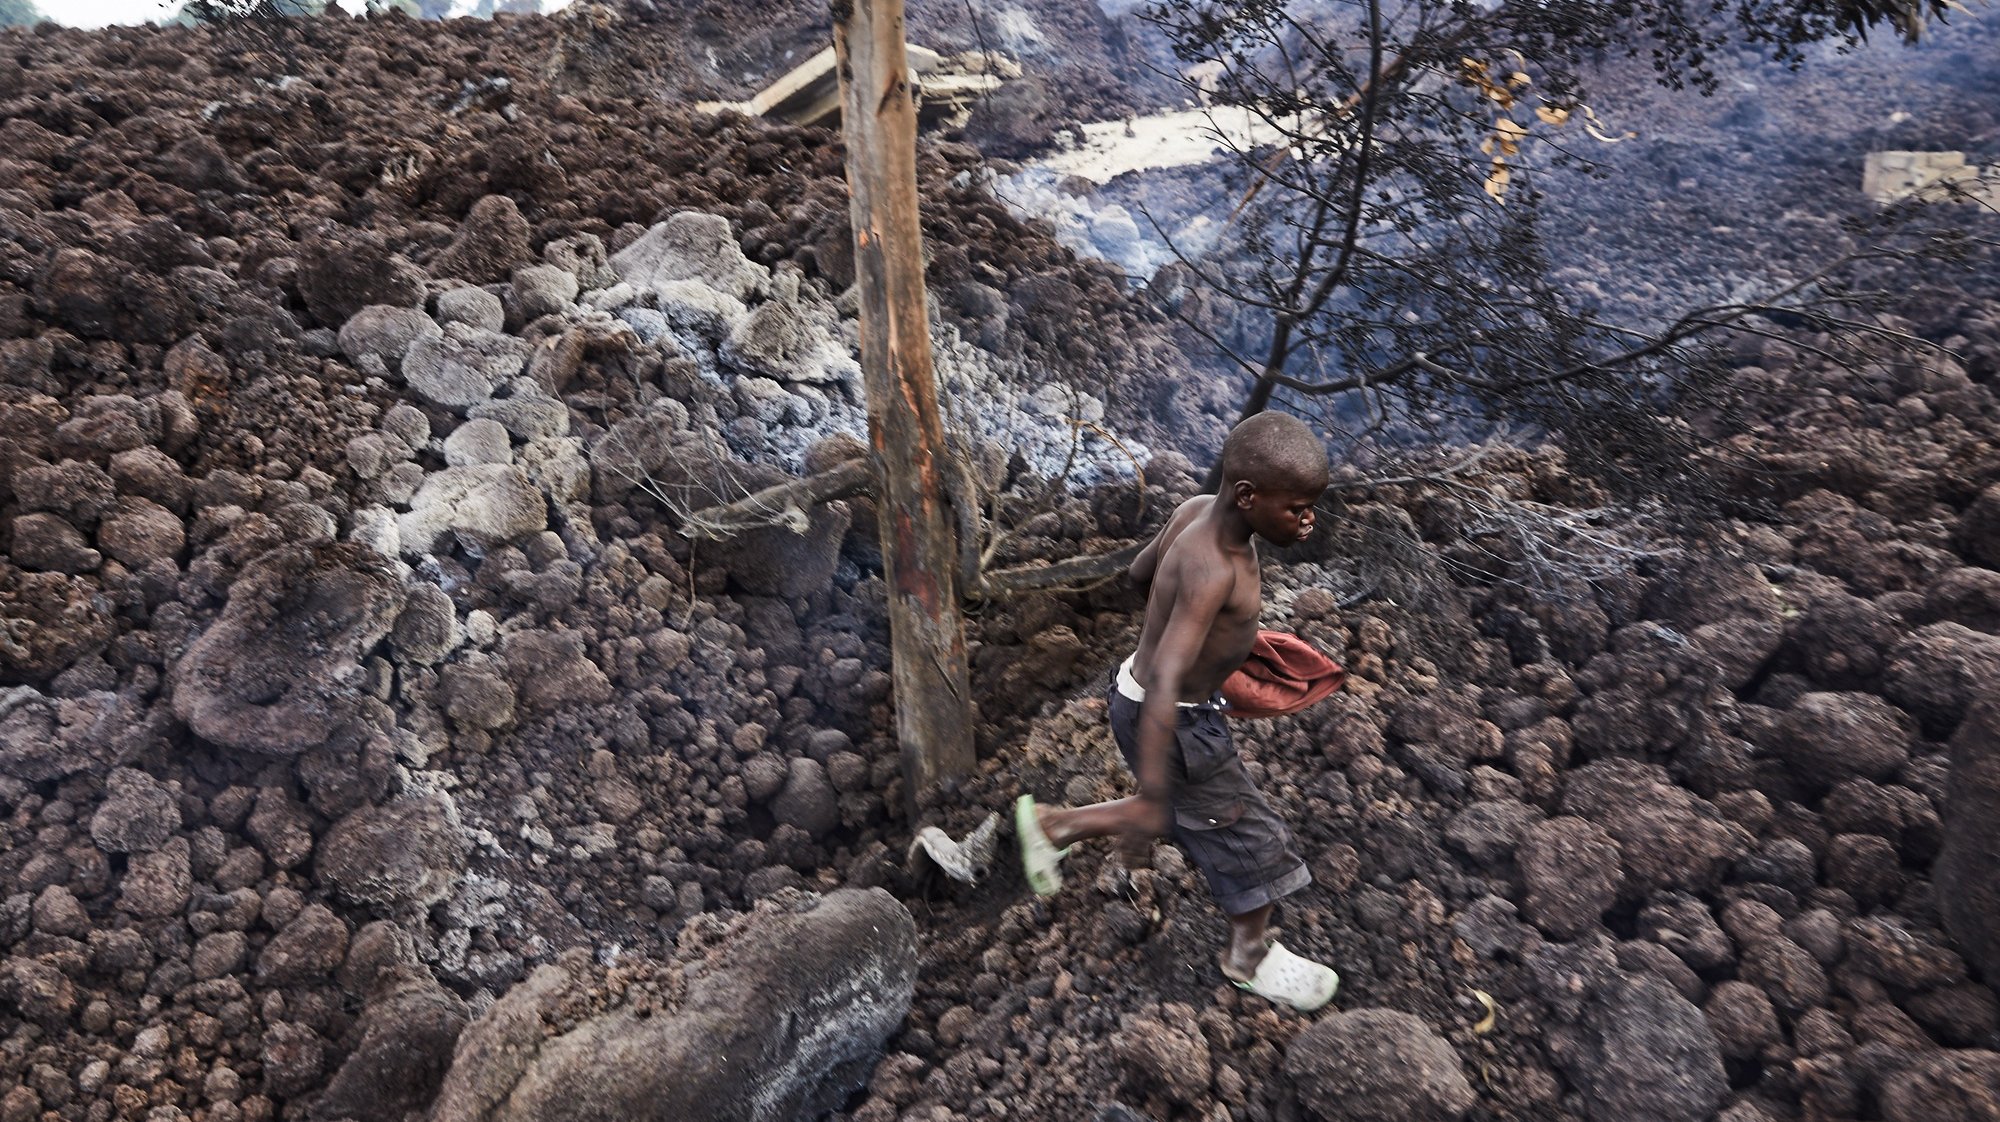 epa09227820 A Congolese boy in the neighbourhood of Buhene walks on piles of lava in the aftermath of a volcanic eruption in Goma, Democratic Republic of Congo, 25 May 2021. One of the planets most active volcanoes Mount Nyiragongo in eastern Democratic Republic of Congo erupted 22 May 2021. According to local journalists, aftershocks from the Nyiragongo volcanic eruption continue in the town of Goma. According to the United Nations children&#039;s agency (UNICEF) 25 May 2021 more than 100 children are missing after having been separated from their parents. Foreign countries, like the United Kingdom, have warned their nationals through their embassies of the continuation of seismic activity and cannot rule out further fissures or lava flow.  EPA/HUGH KINSELLA CUNNINGHAM